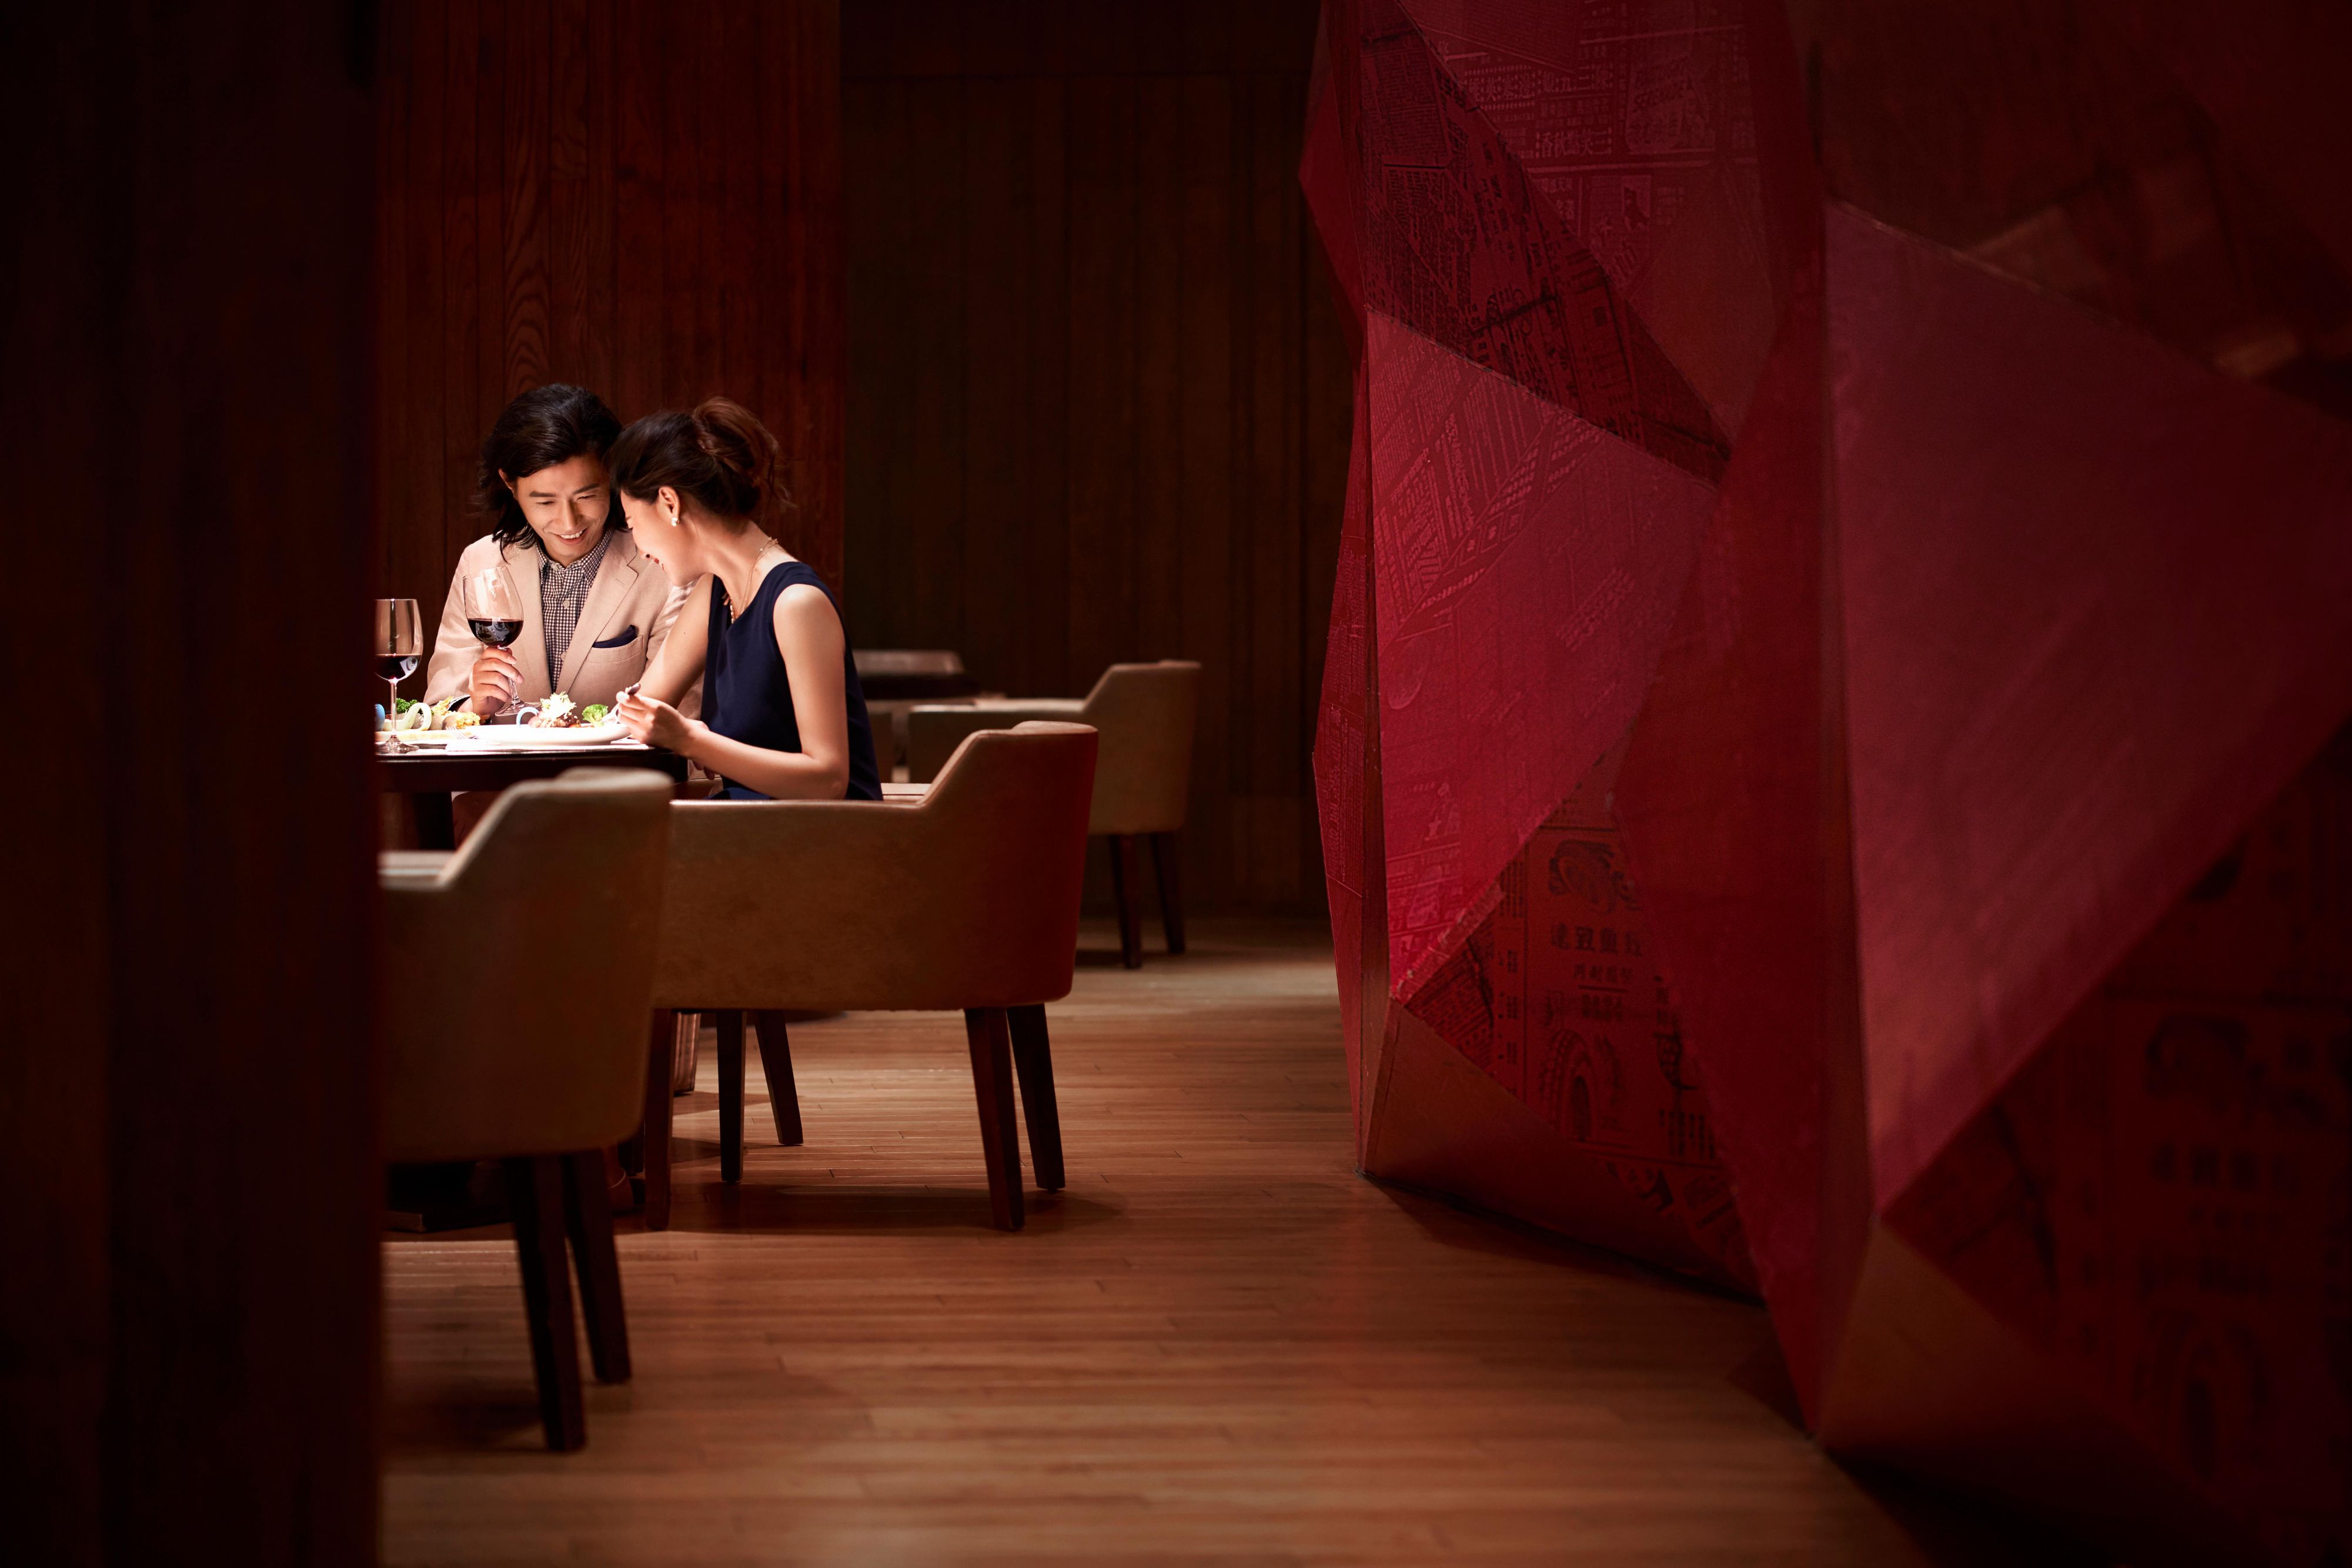 Inspired by Xiamen's unique colonial past, Quay Restaurant & Lounge, located on the 4th floor, offers a delectable mix of local cuisine, South-east Asian favourites and western dishes. The restaurant features an expansive city-view terrace overlooking Gulangyu Island and 2 private dining rooms with sea view.